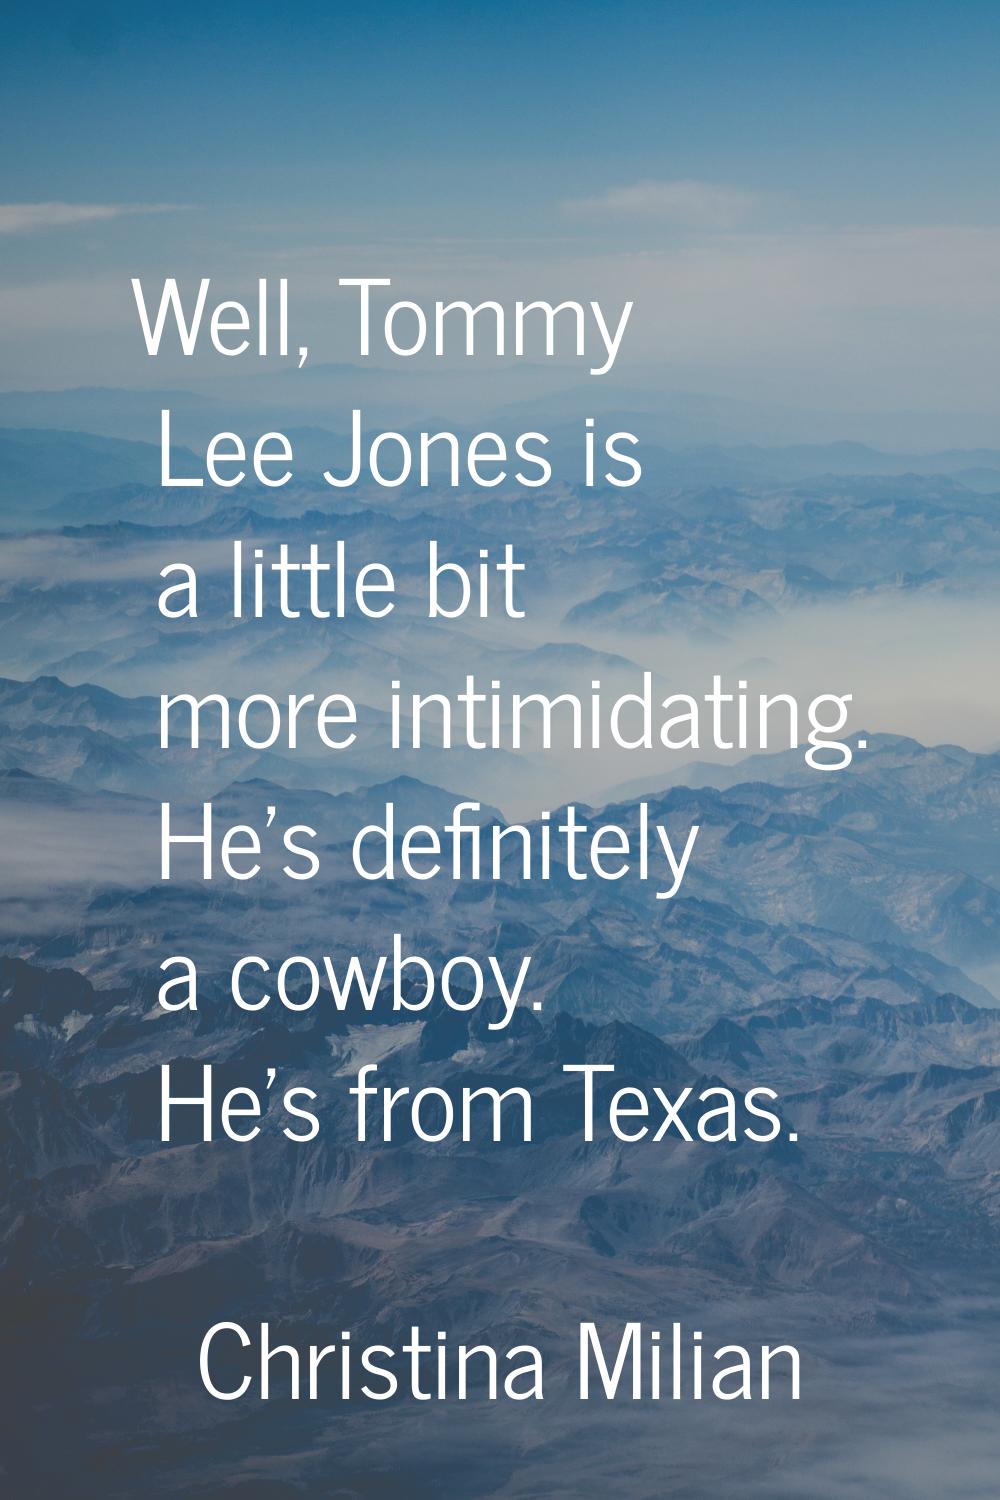 Well, Tommy Lee Jones is a little bit more intimidating. He's definitely a cowboy. He's from Texas.